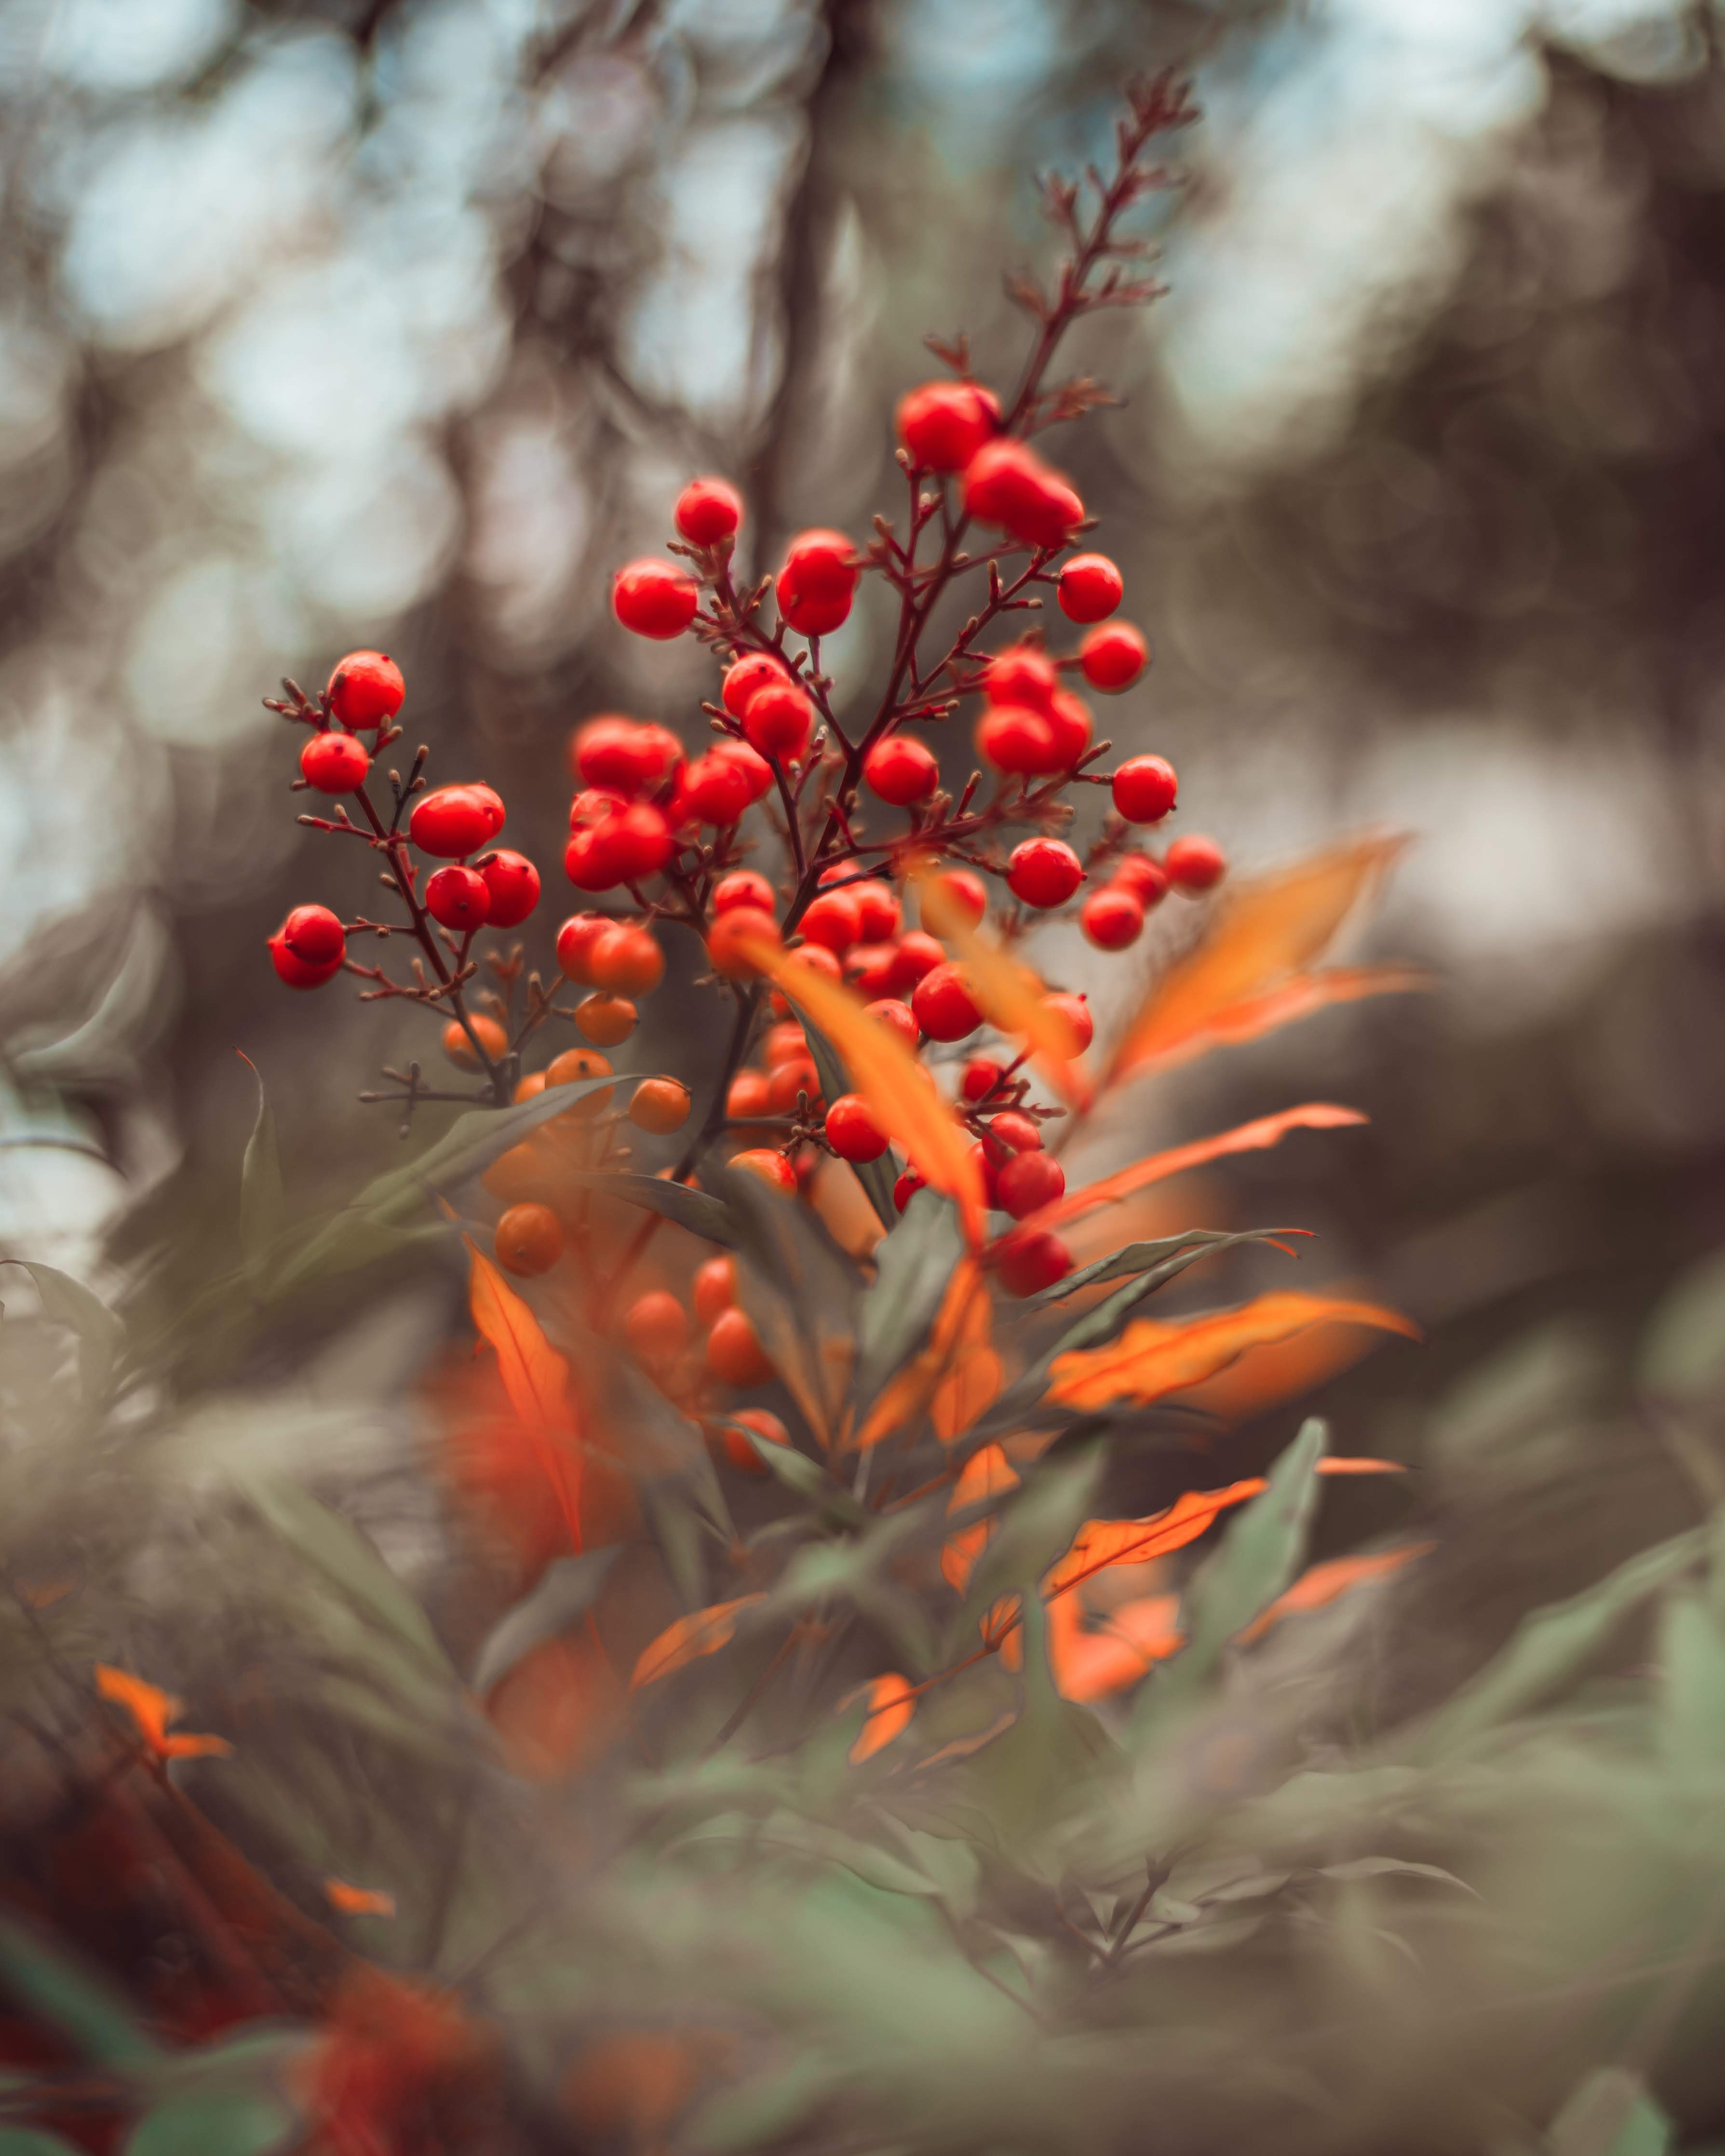 83832 download wallpaper leaves, macro, berries, red, branches screensavers and pictures for free